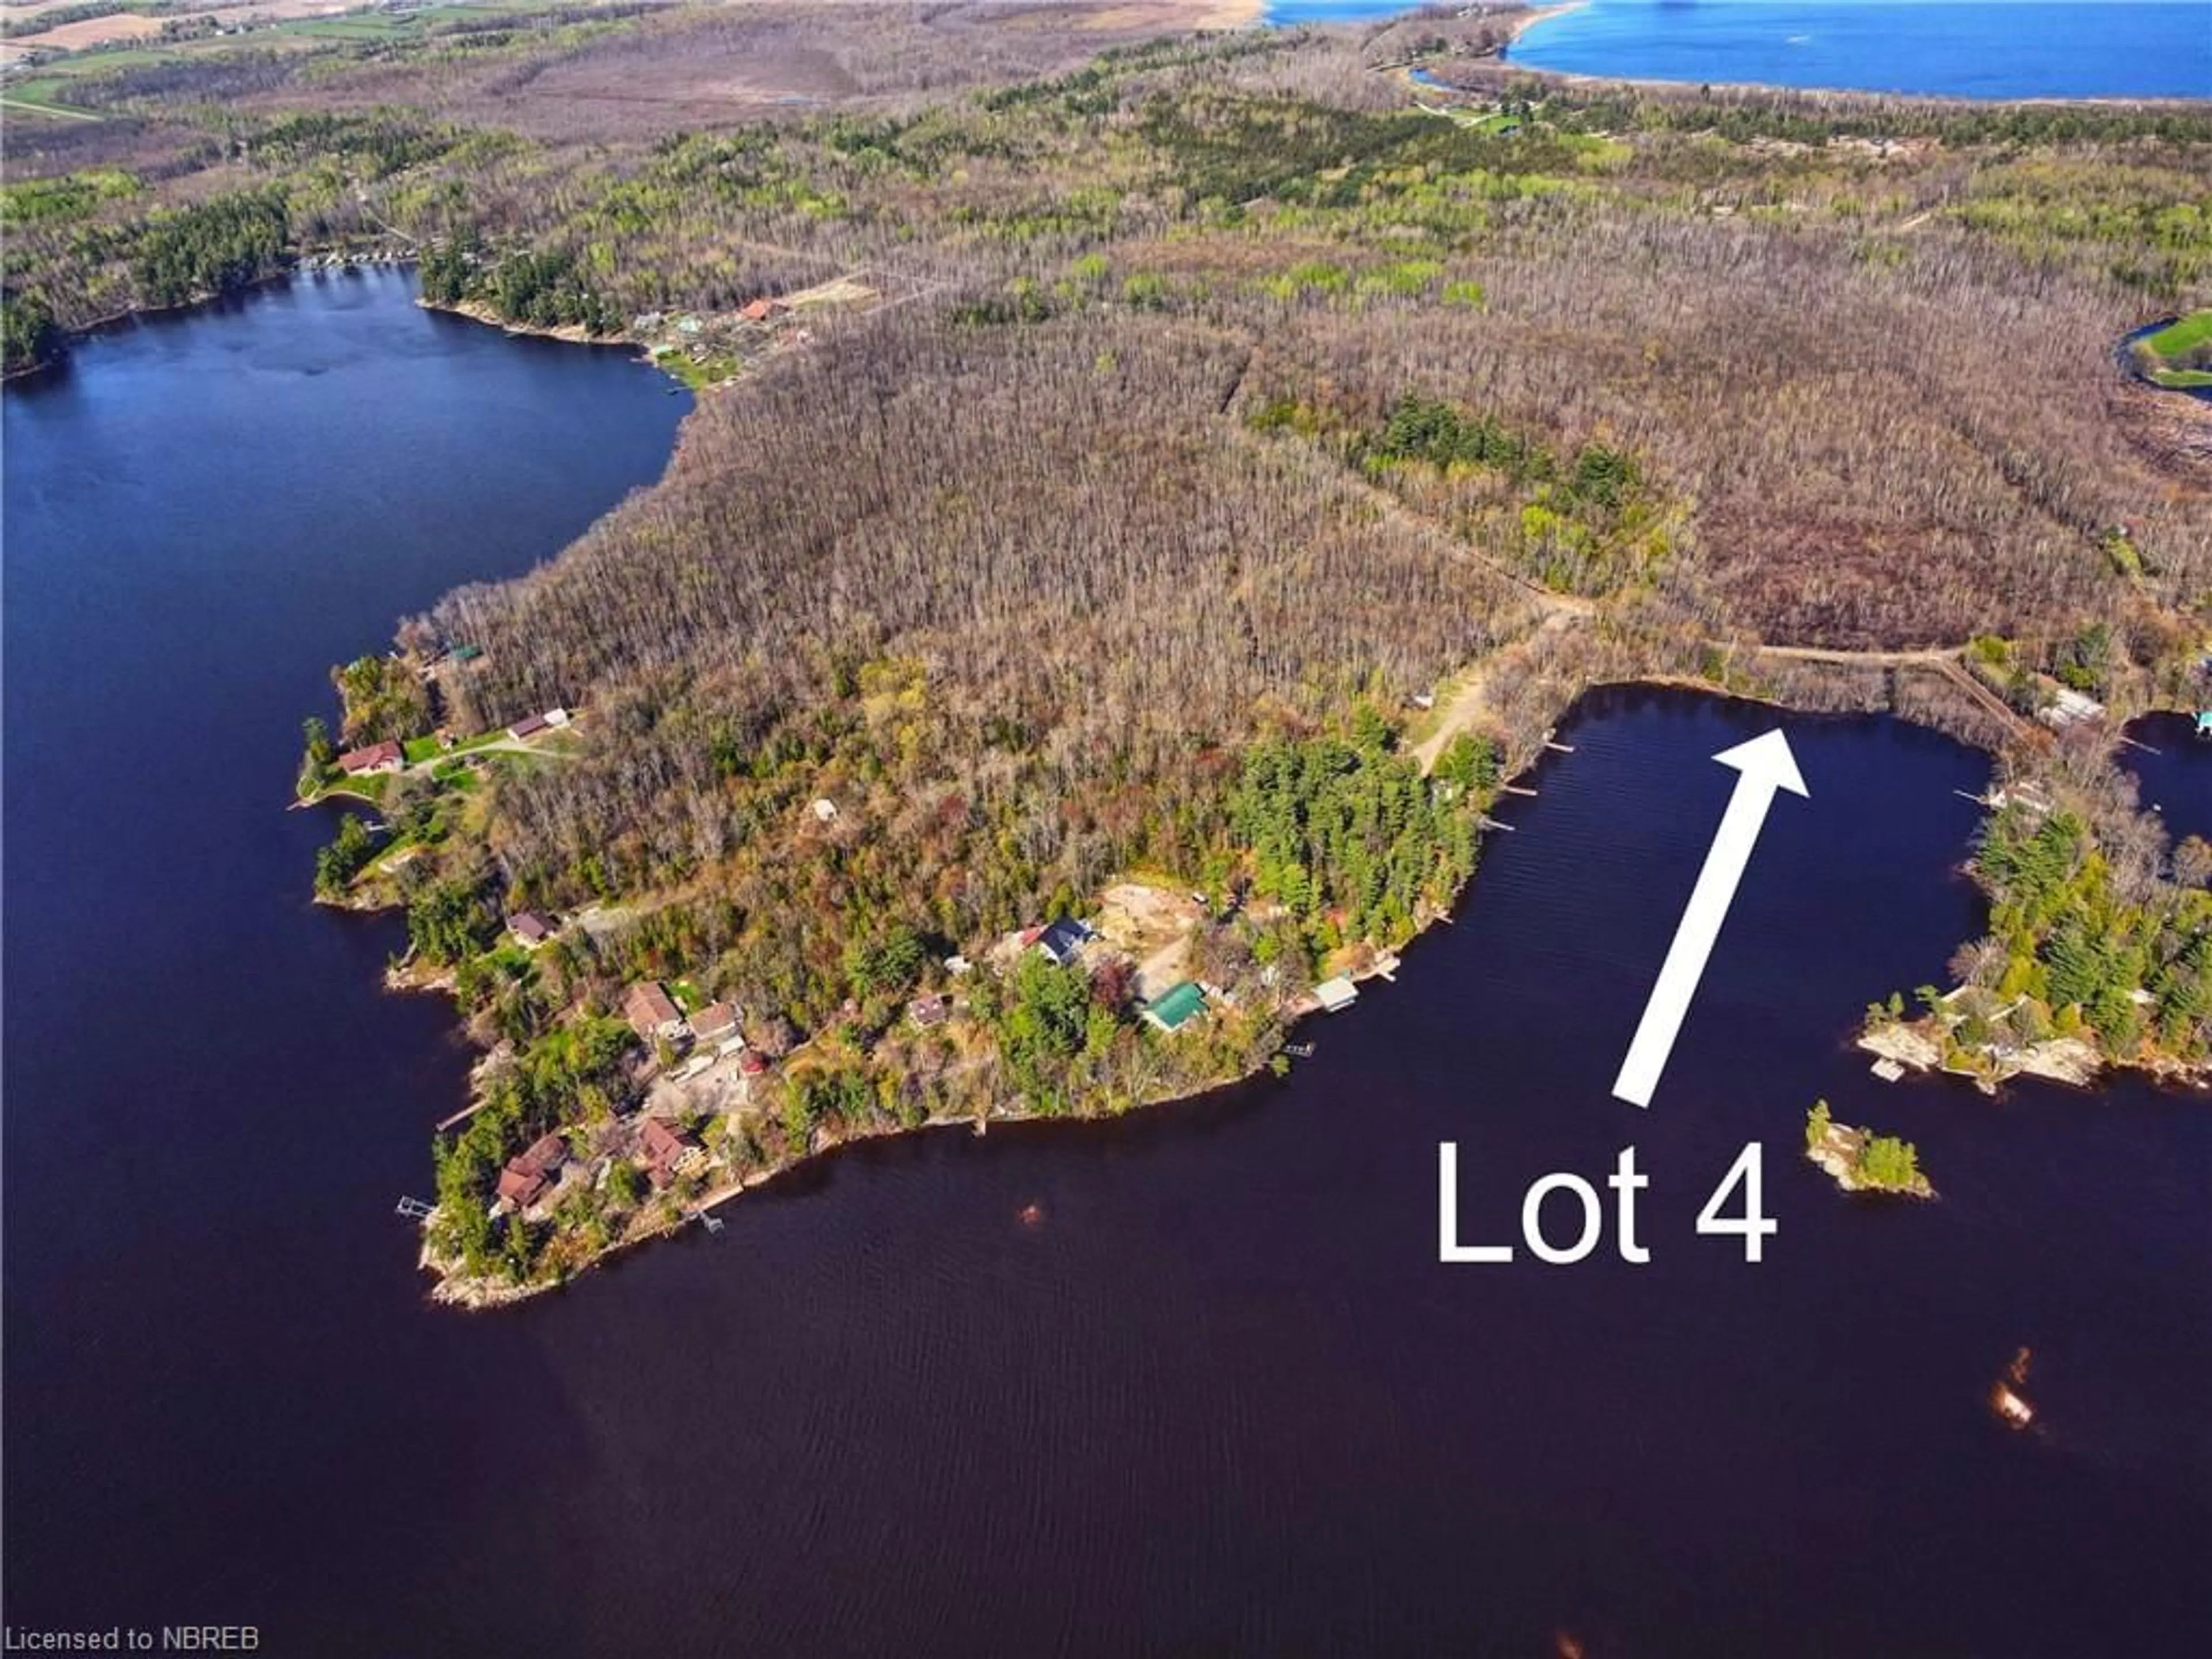 Lakeview for LOT 4 O'brien Rd, Verner Ontario P0H 1G0